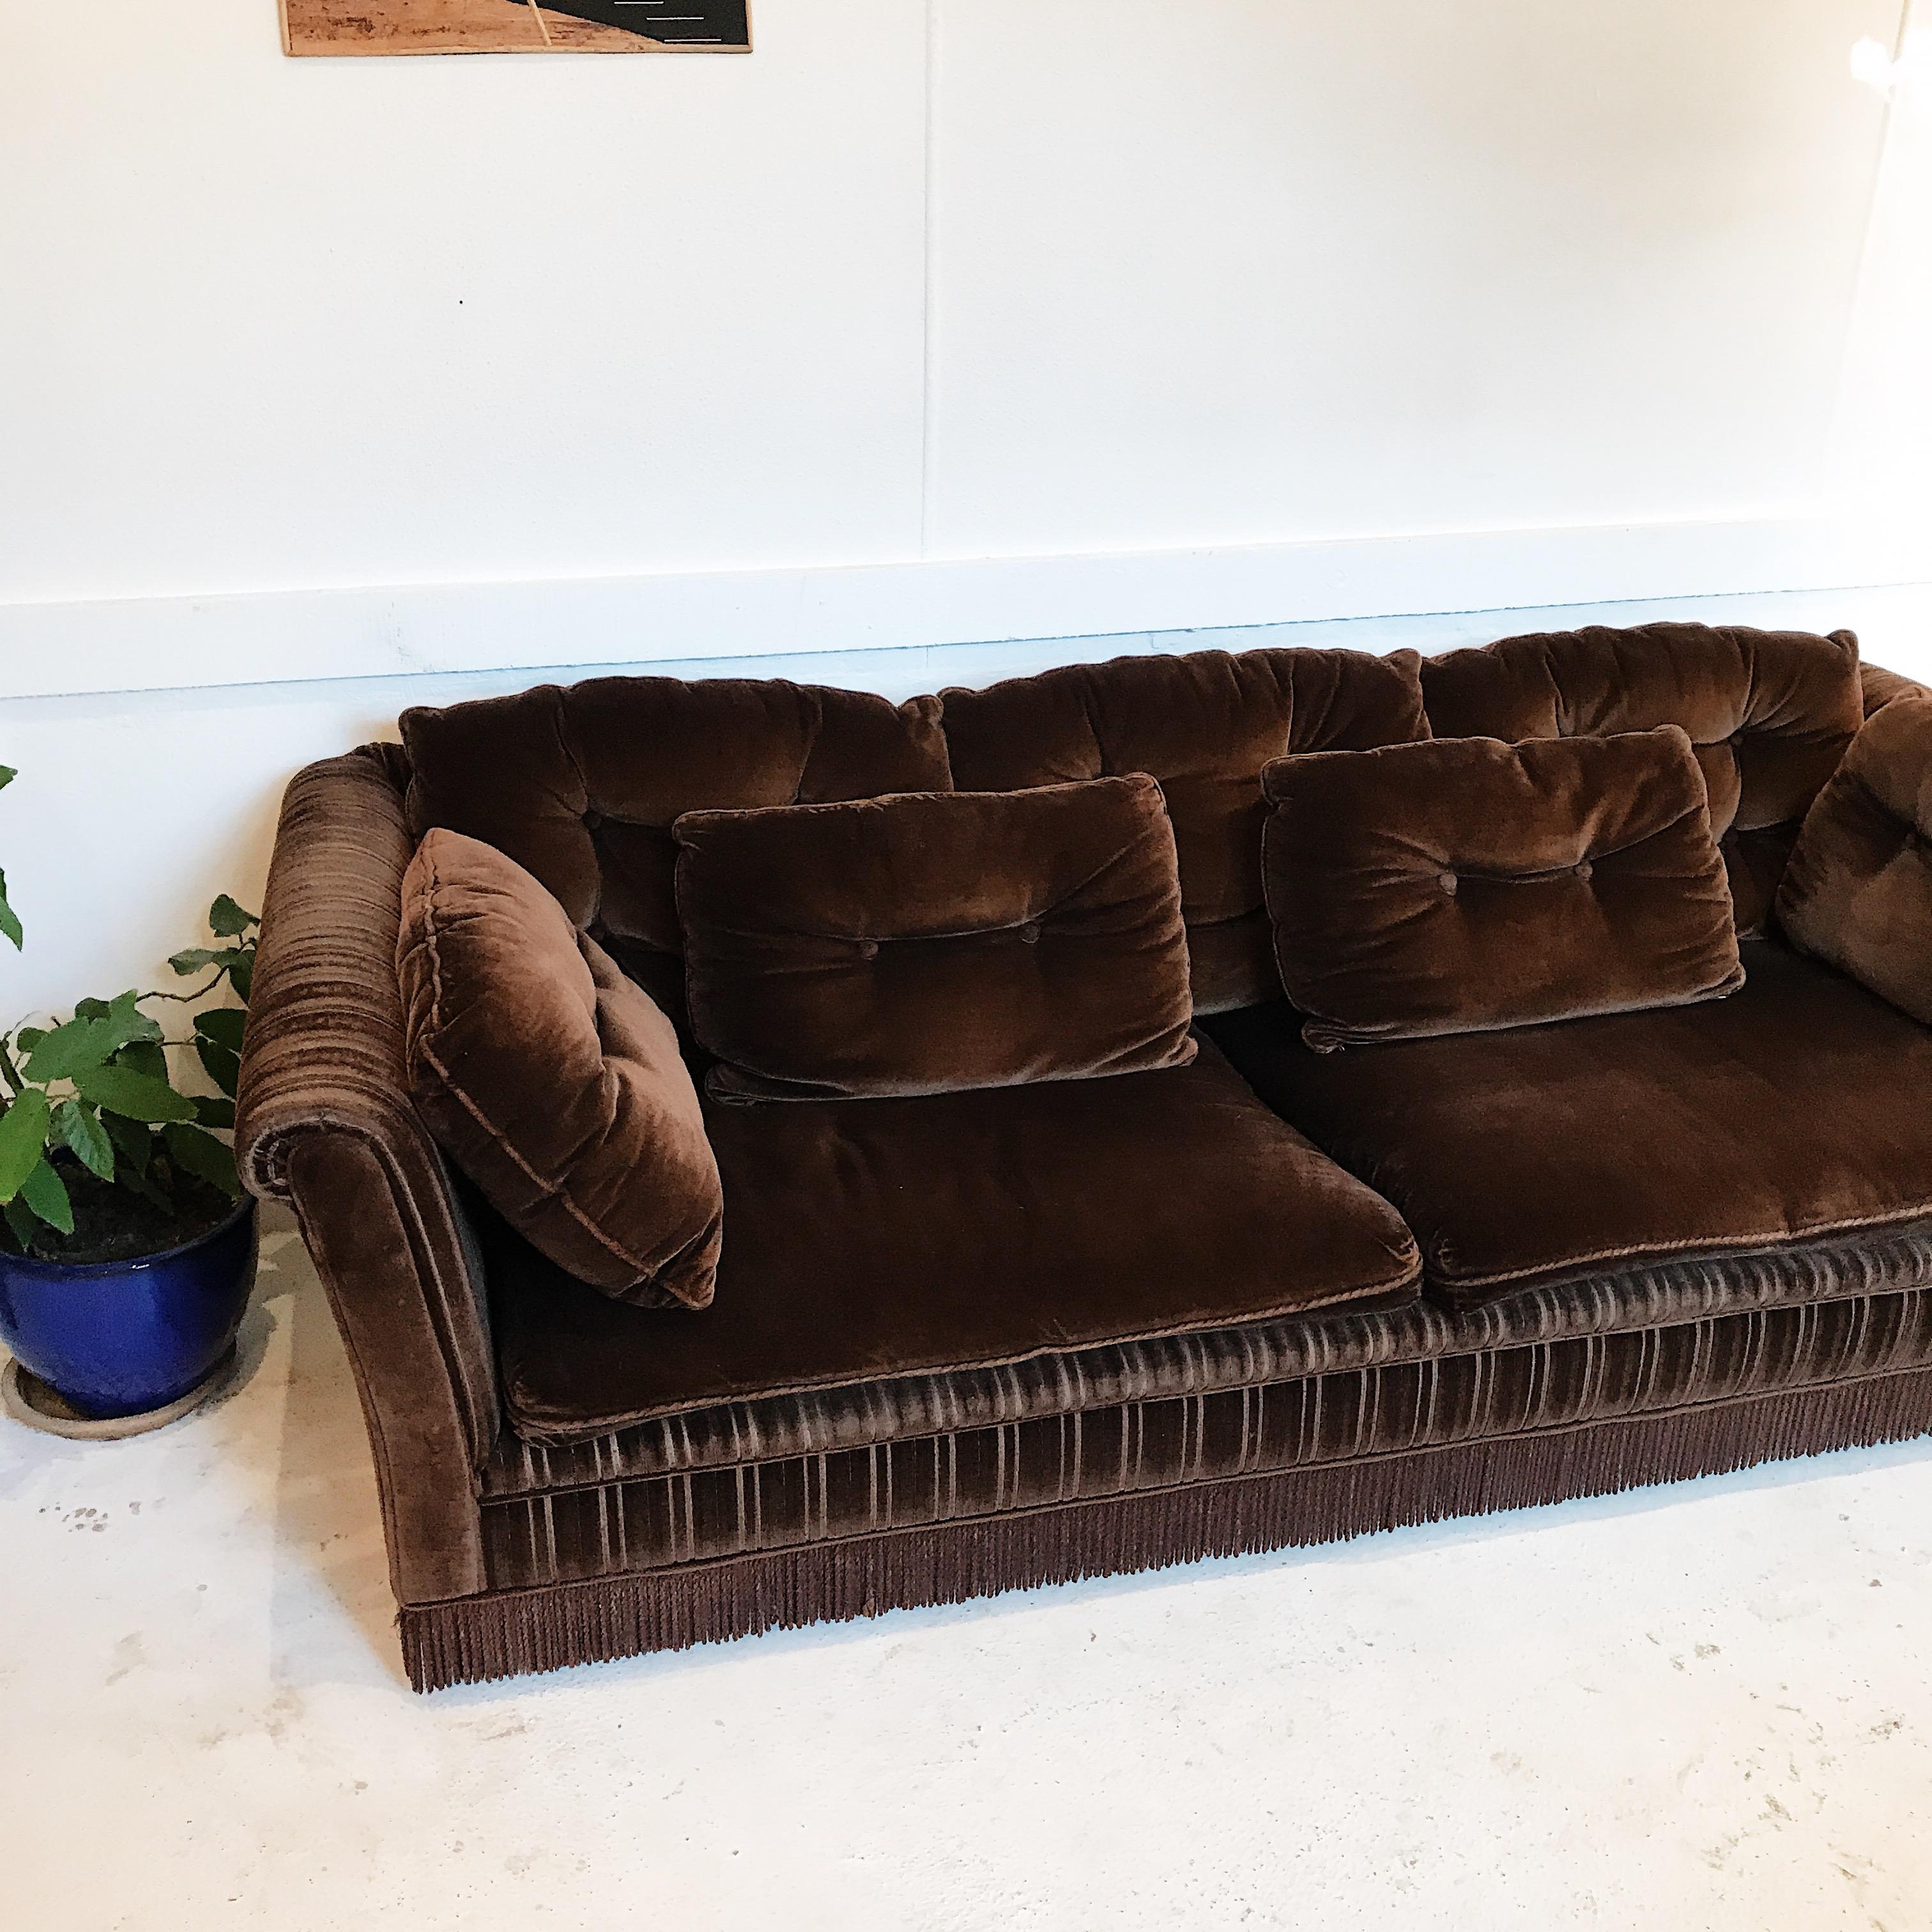 Absolutely immaculate chocolate brown velvet three-seat sofa with an abundance of buttoned pillows, cord striped arms and tasseled at the base.

 